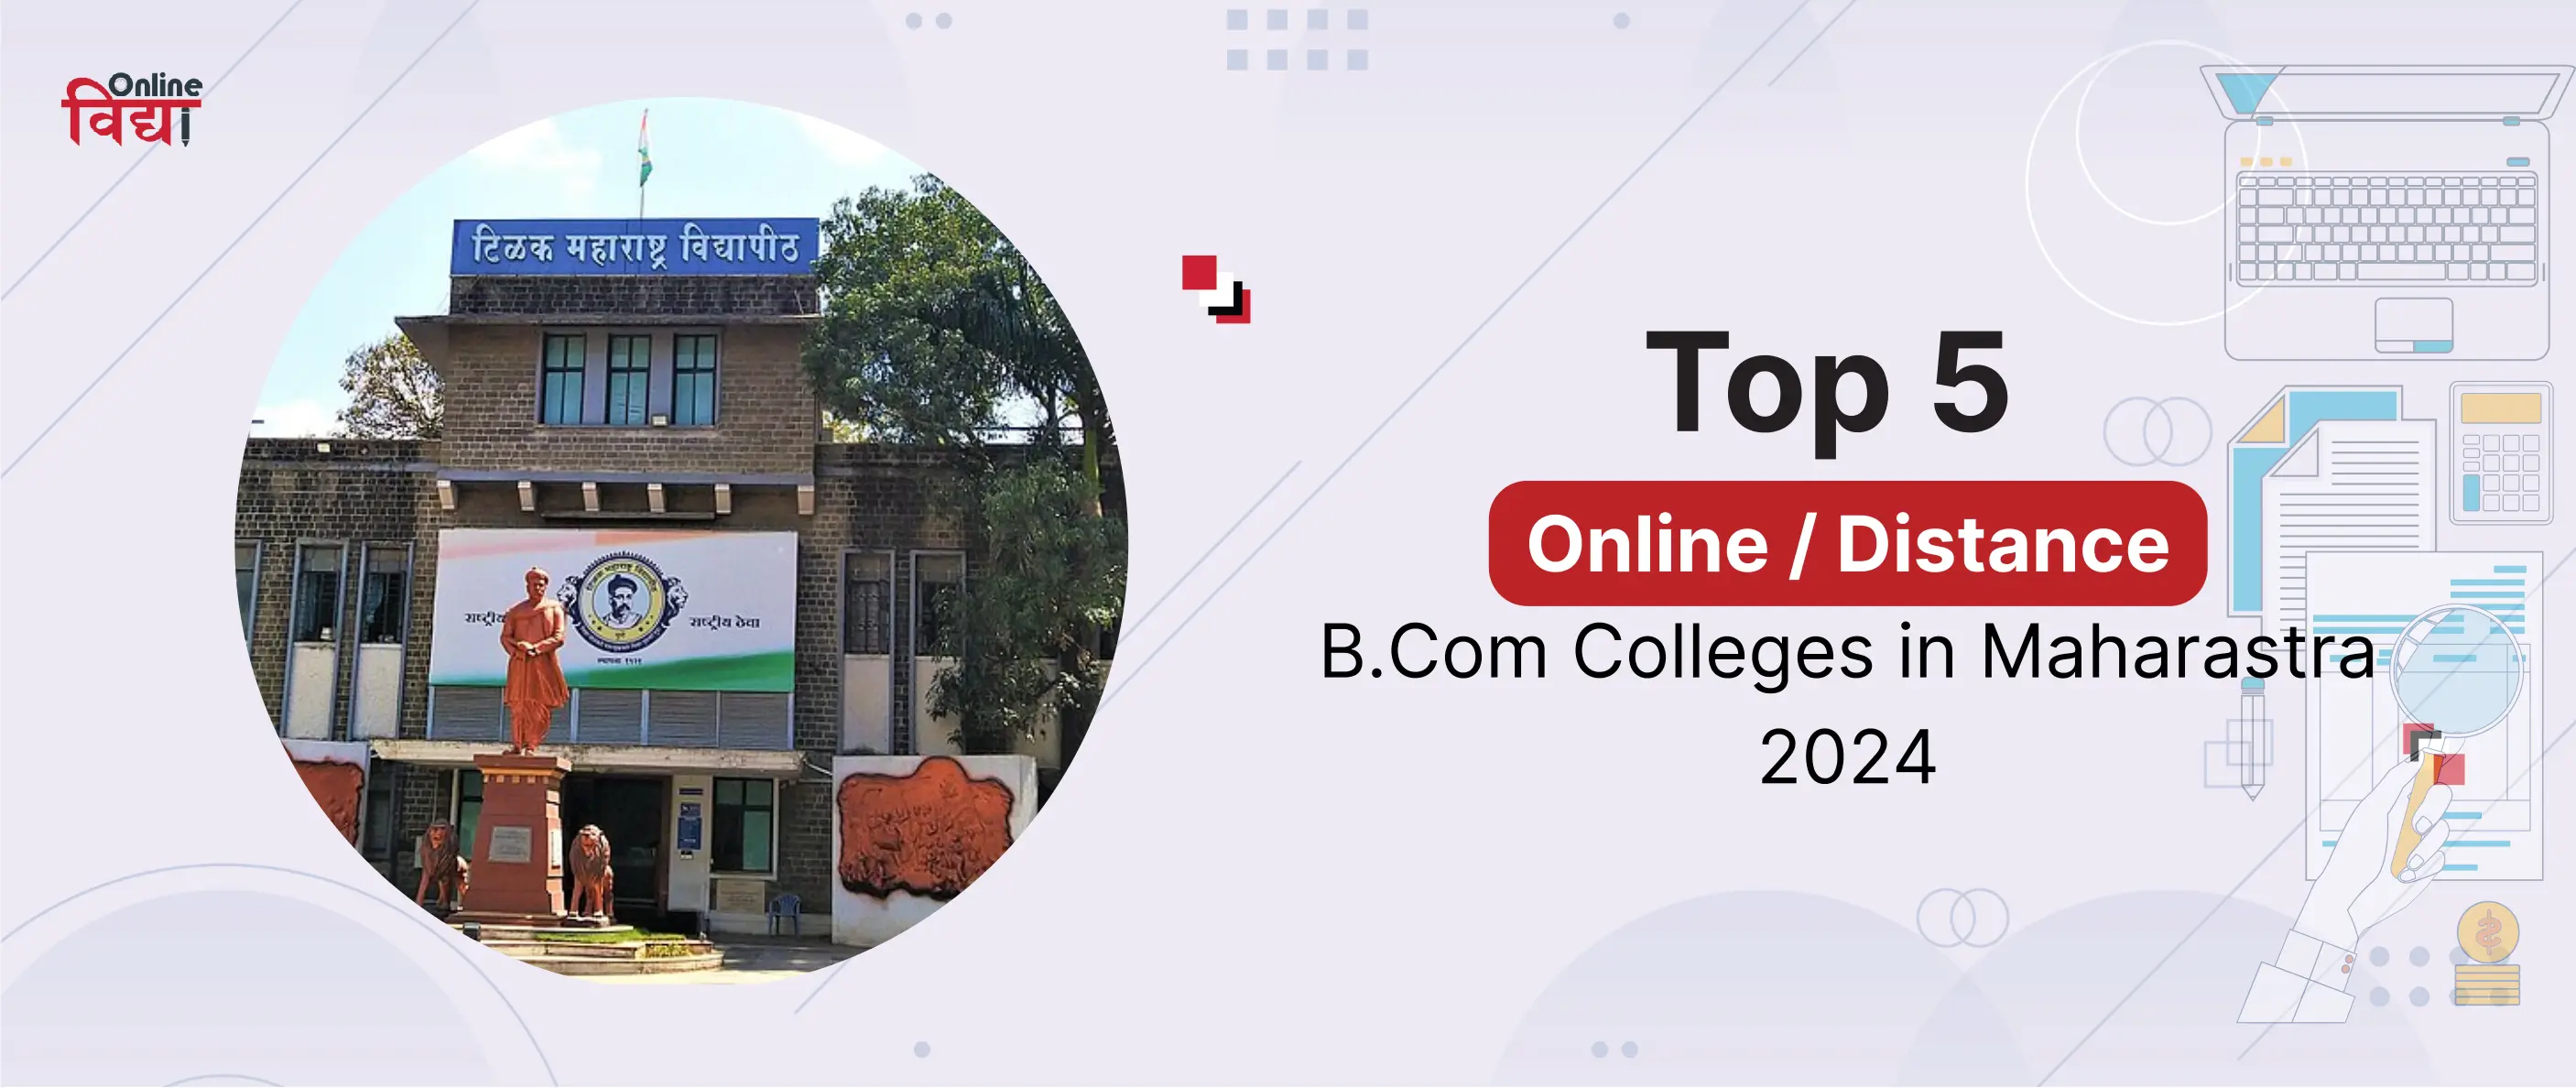 Top 5 Online/ Distance B.Com Colleges in Maharashtra 2024